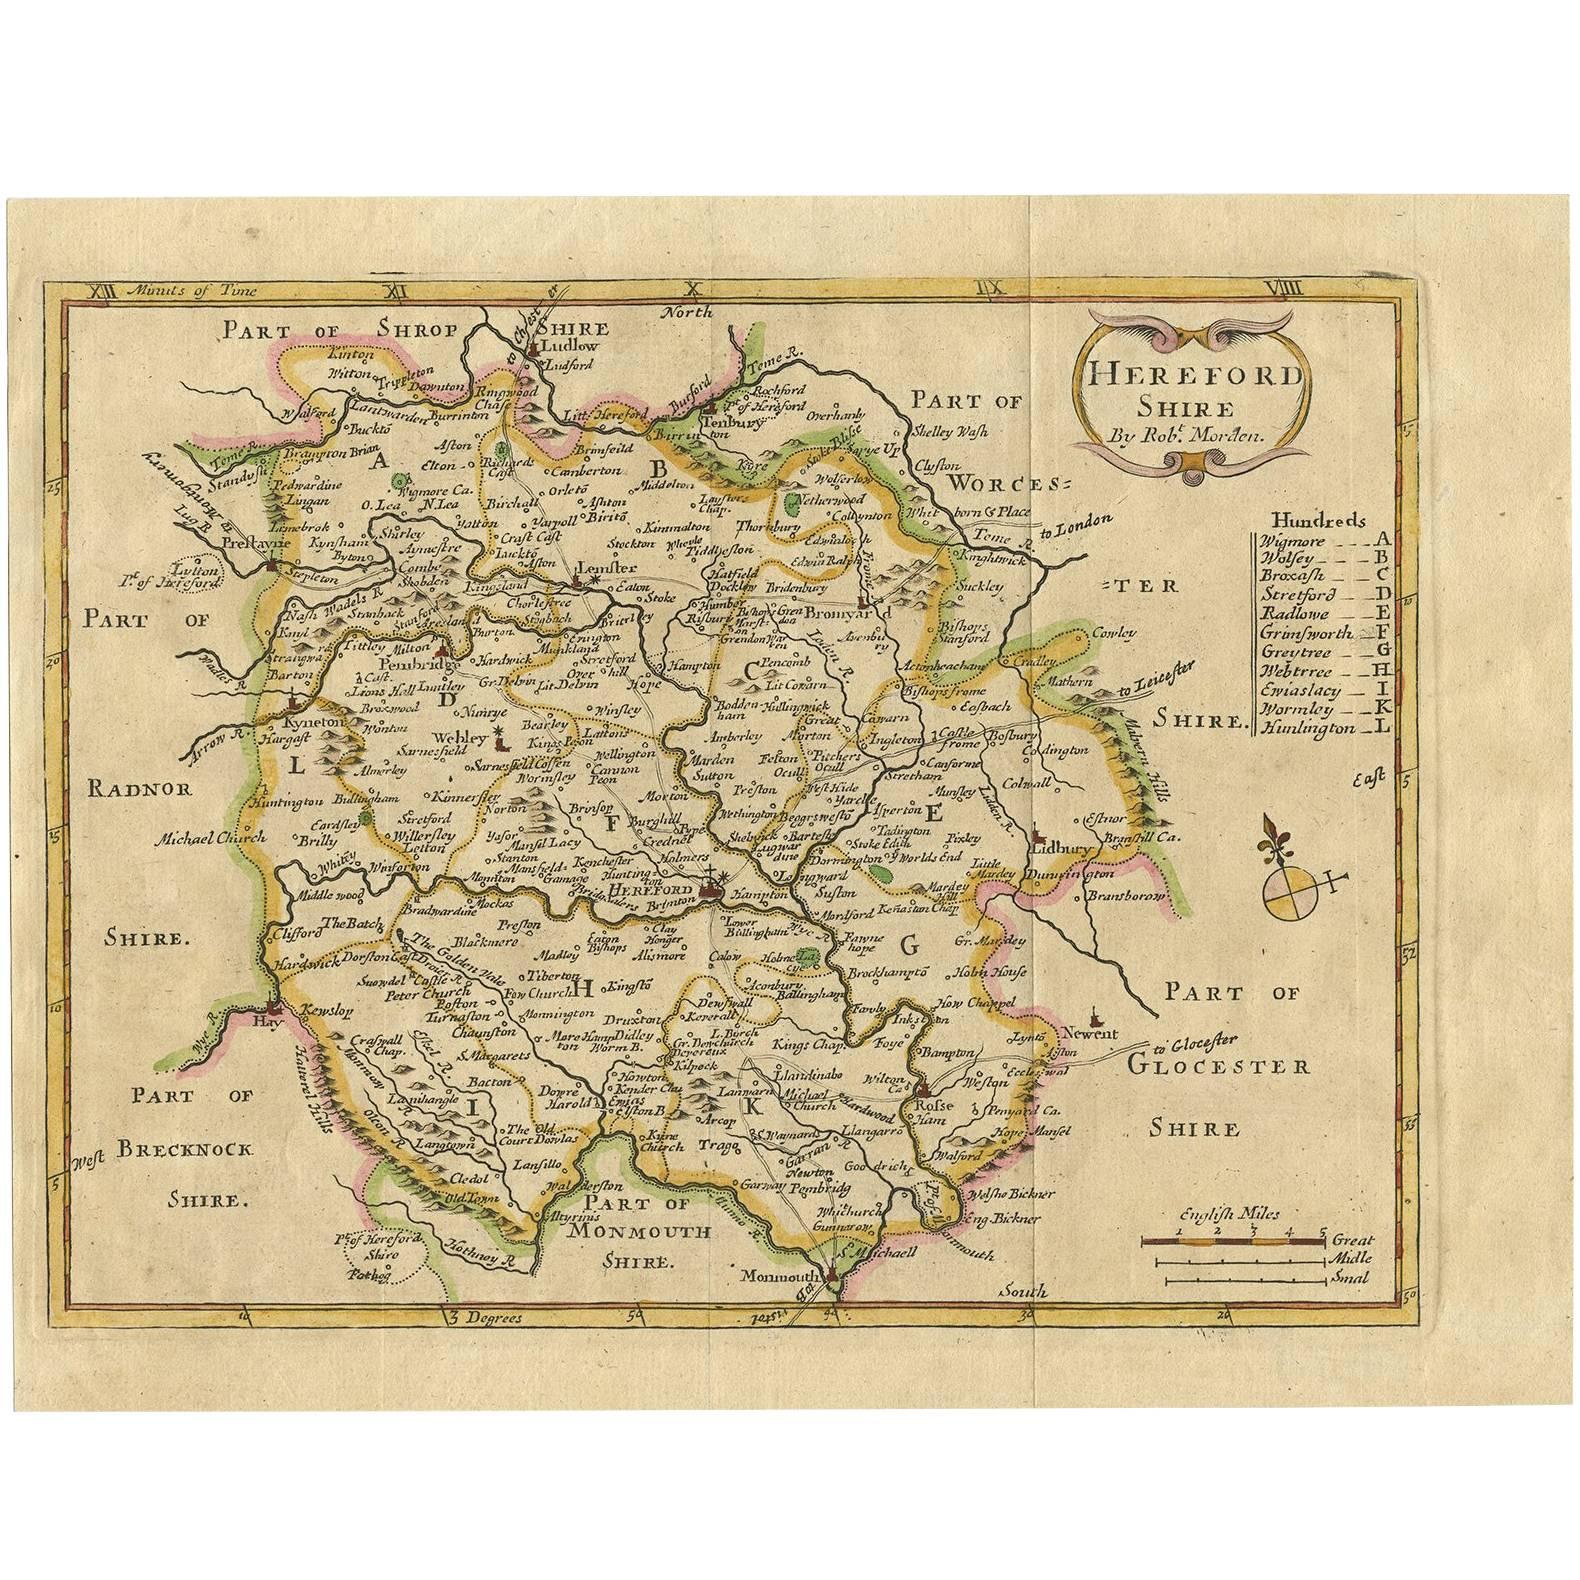 Antique Map of Herefordshire 'England' by R. Morden, 1708